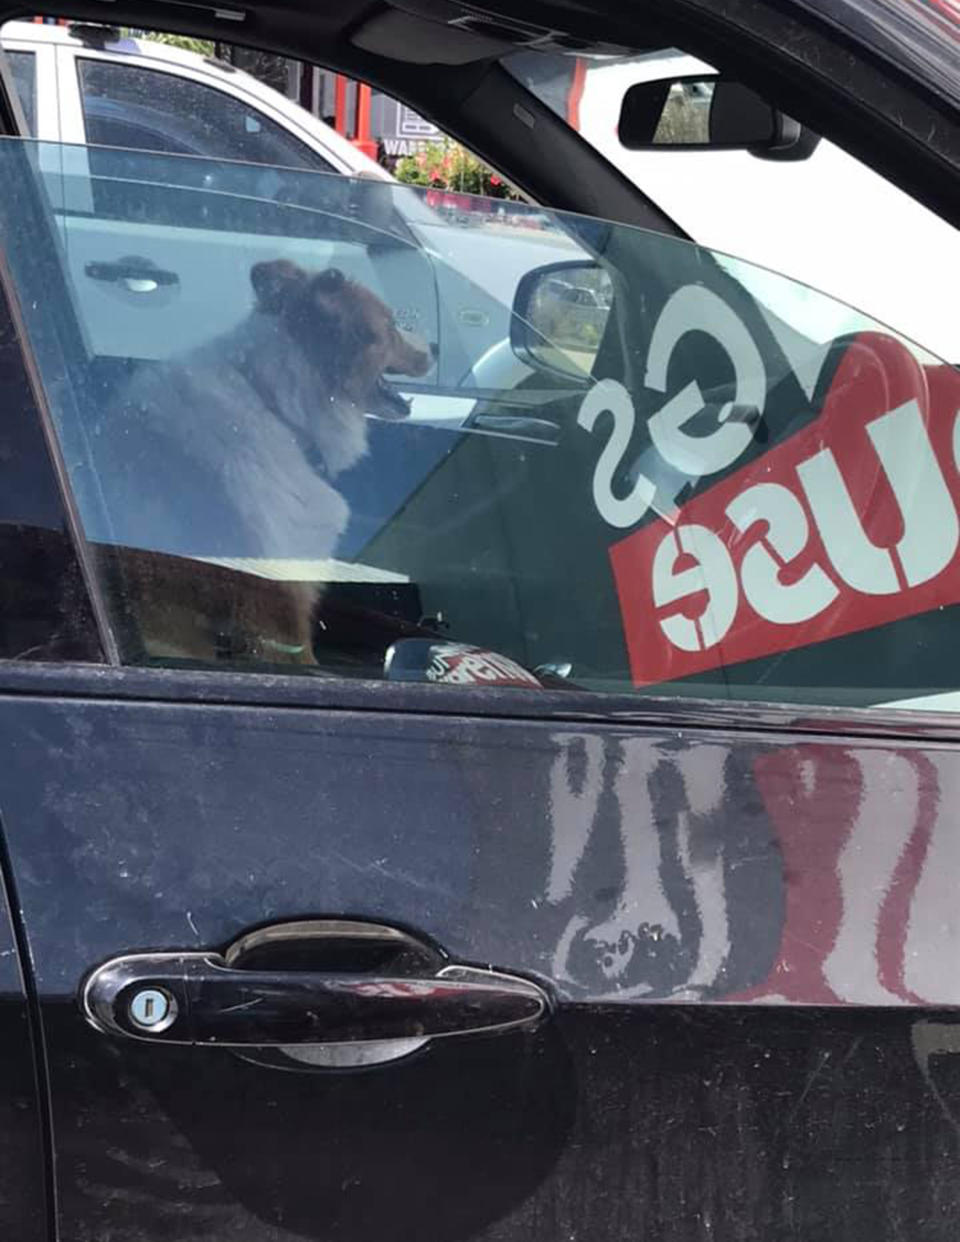 a dog in a parked car on a hot day